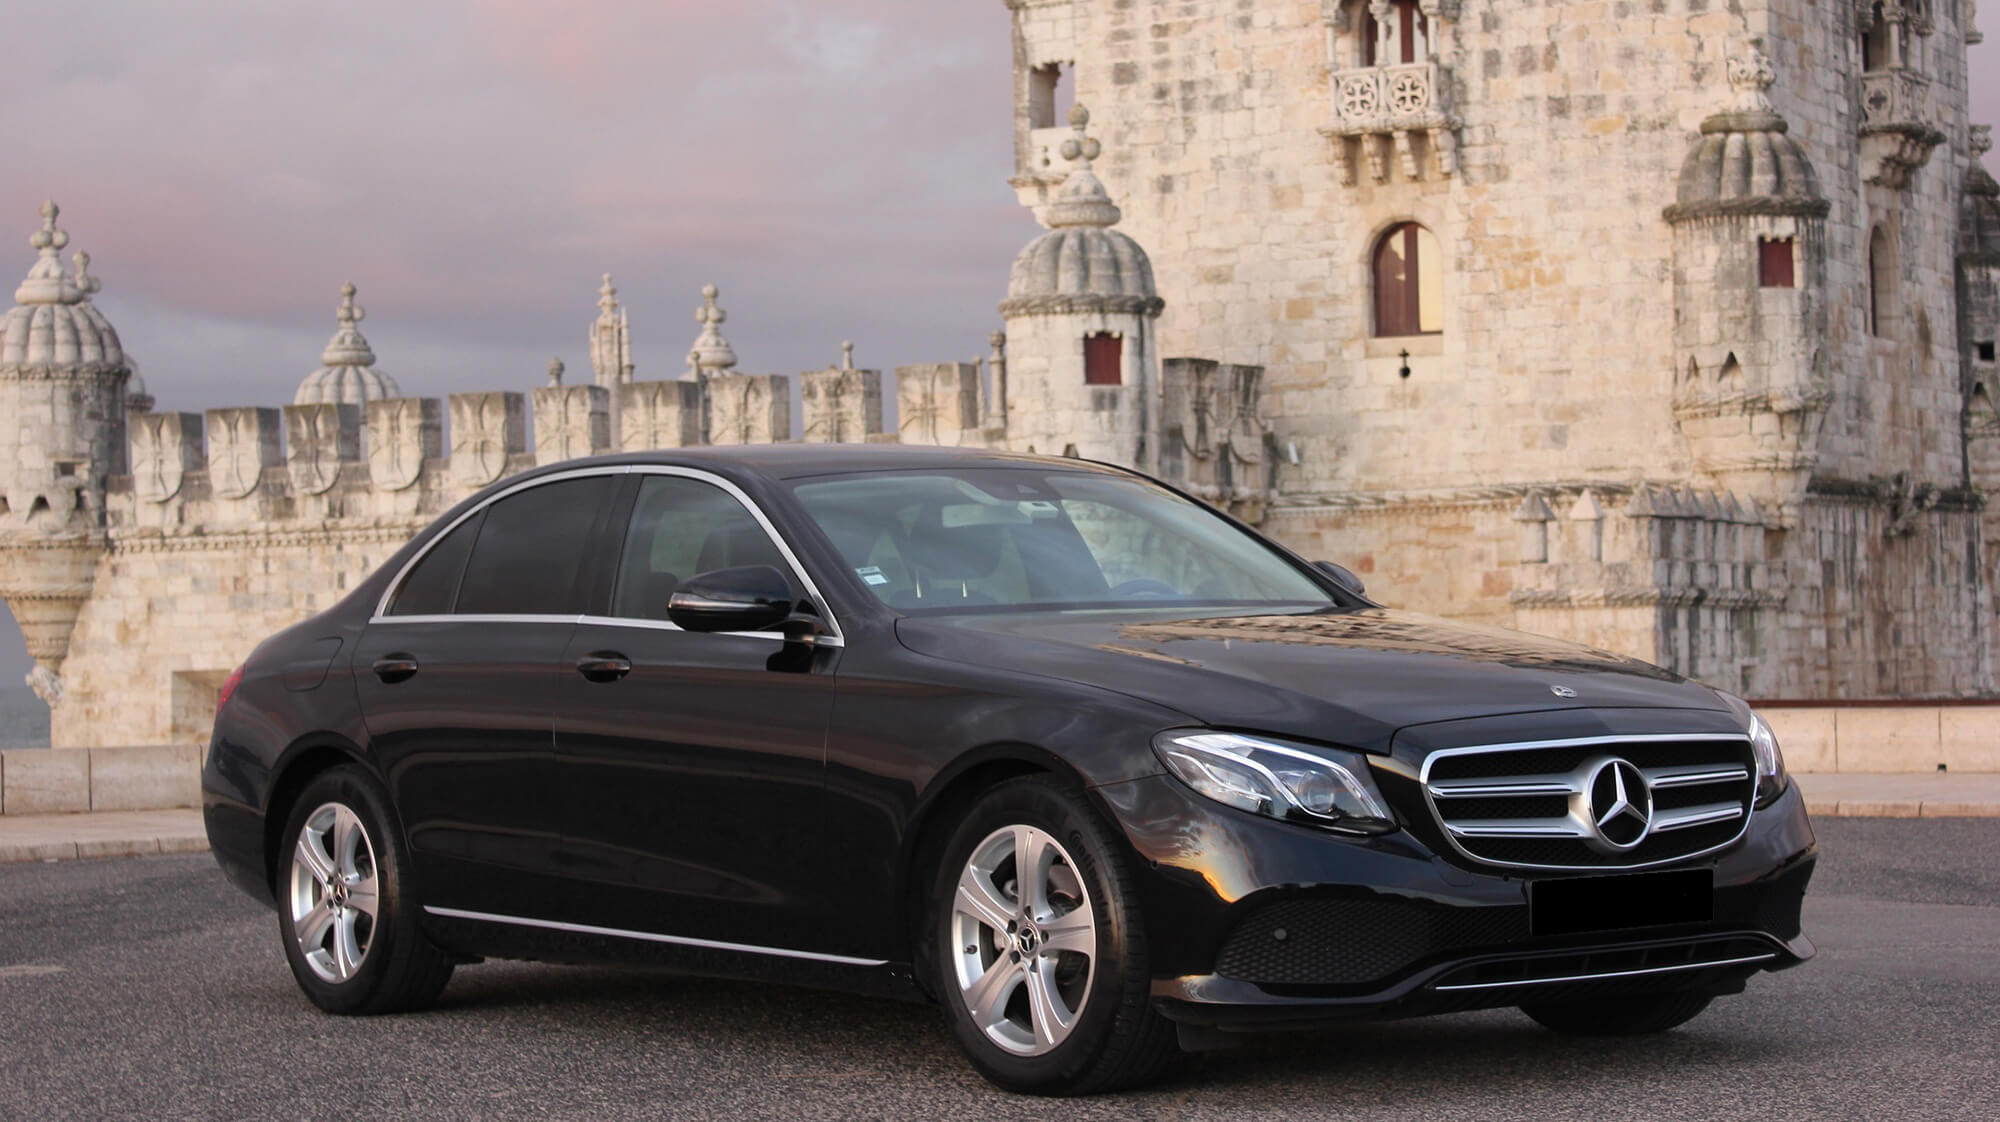 Hire a 3 seater Car with driver (Mercedes Class E 2018) from SPECIALIMO TRAVEL GROUP in Almargem do Bispo, Sintra 